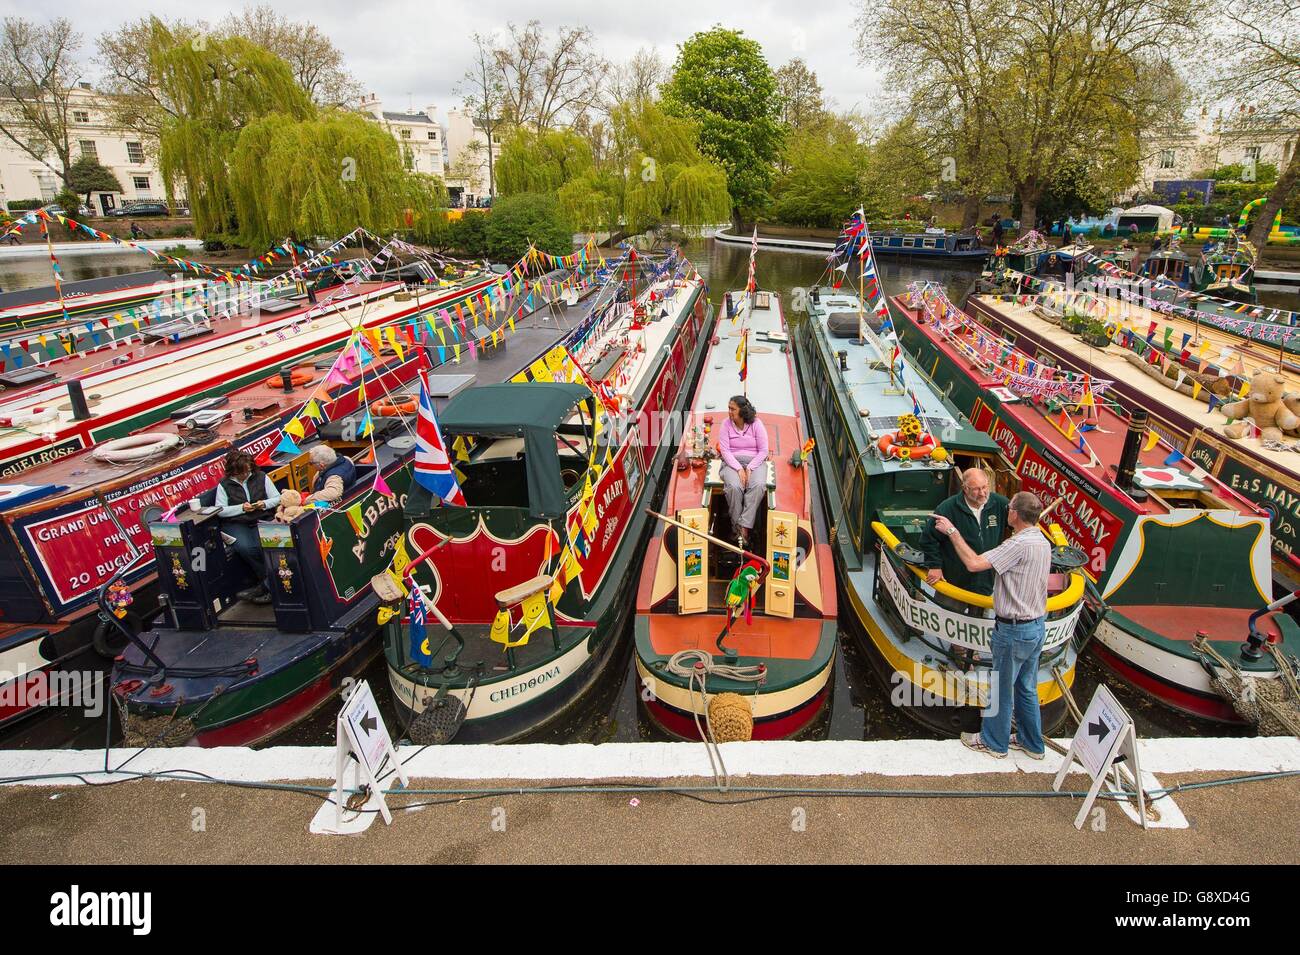 A general view of canal boats during the Inland Waterways Association's annual Canalway Cavalcade festival, at Little Venice, London, which since 1983 has featured a gathering of decorated narrow boats taking part in competitions and parades. Stock Photo